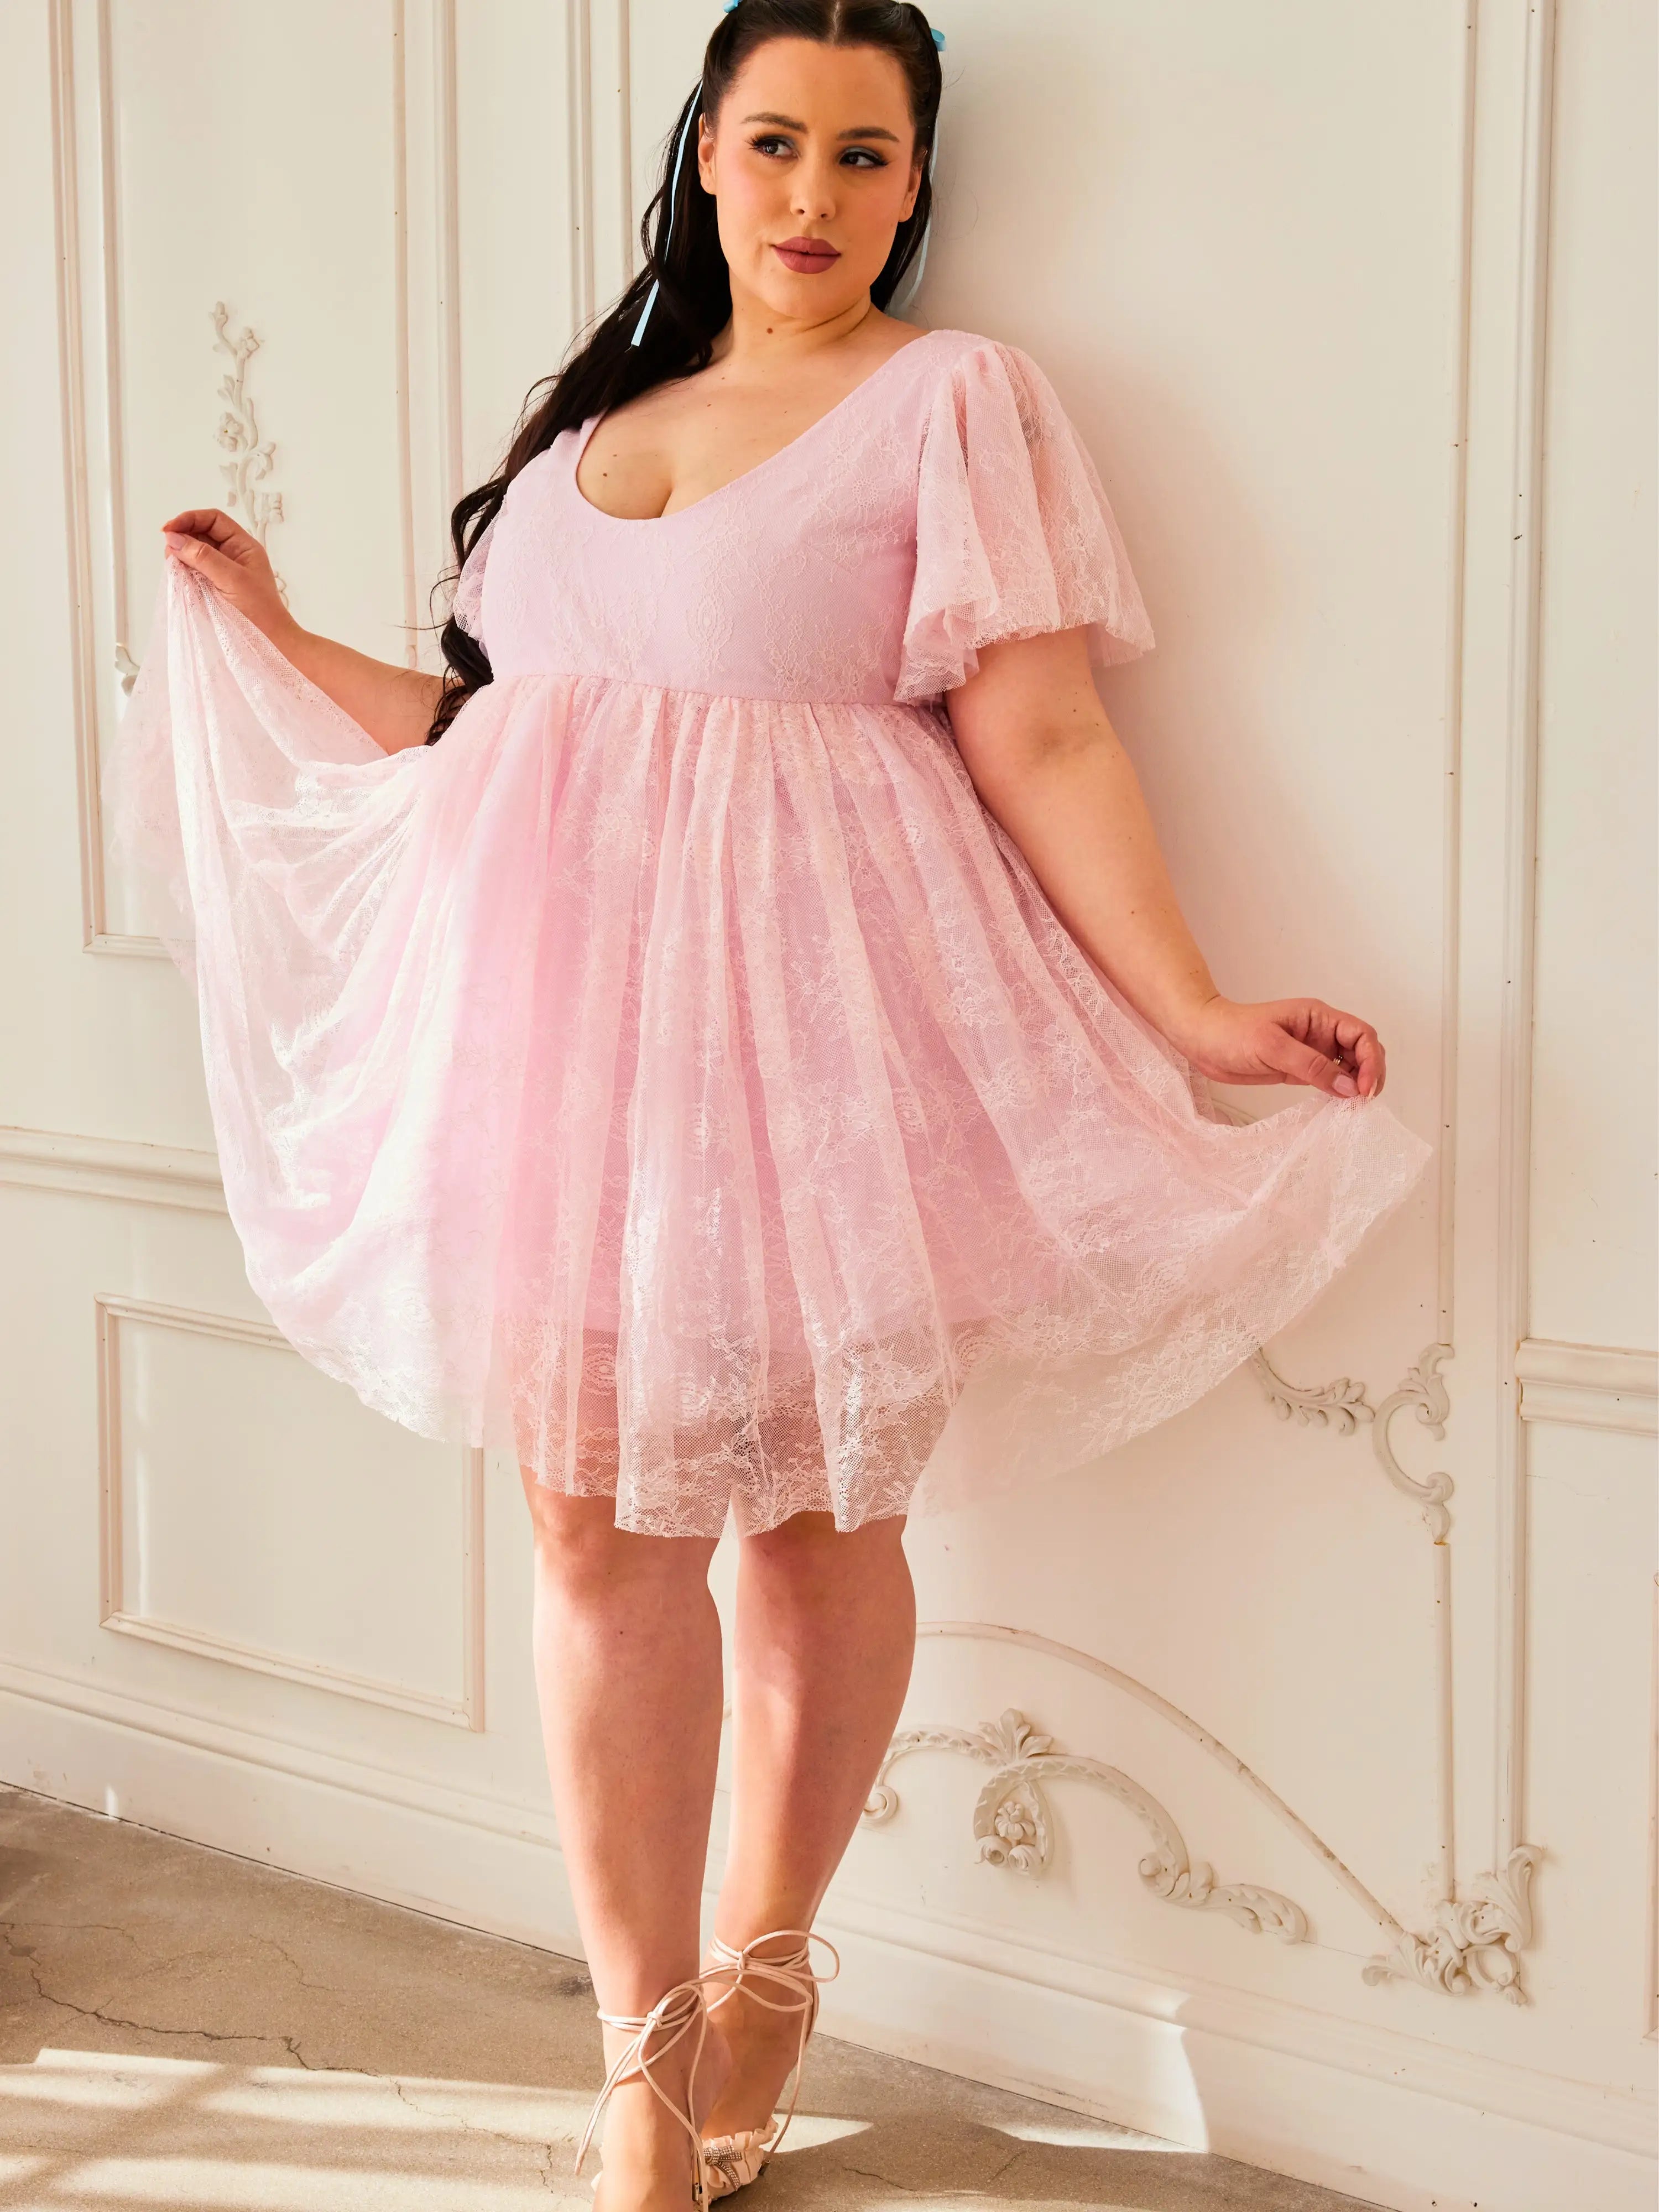 The Pink Candy Cherub Dress - Introducing a new design- The Cherub Dress, a heavenly creation spun from the most delicate Pink Candy Lace. This ethereal ensemble is designed for those who delight in the whimsical and the wondrous, offering a sartorial esc